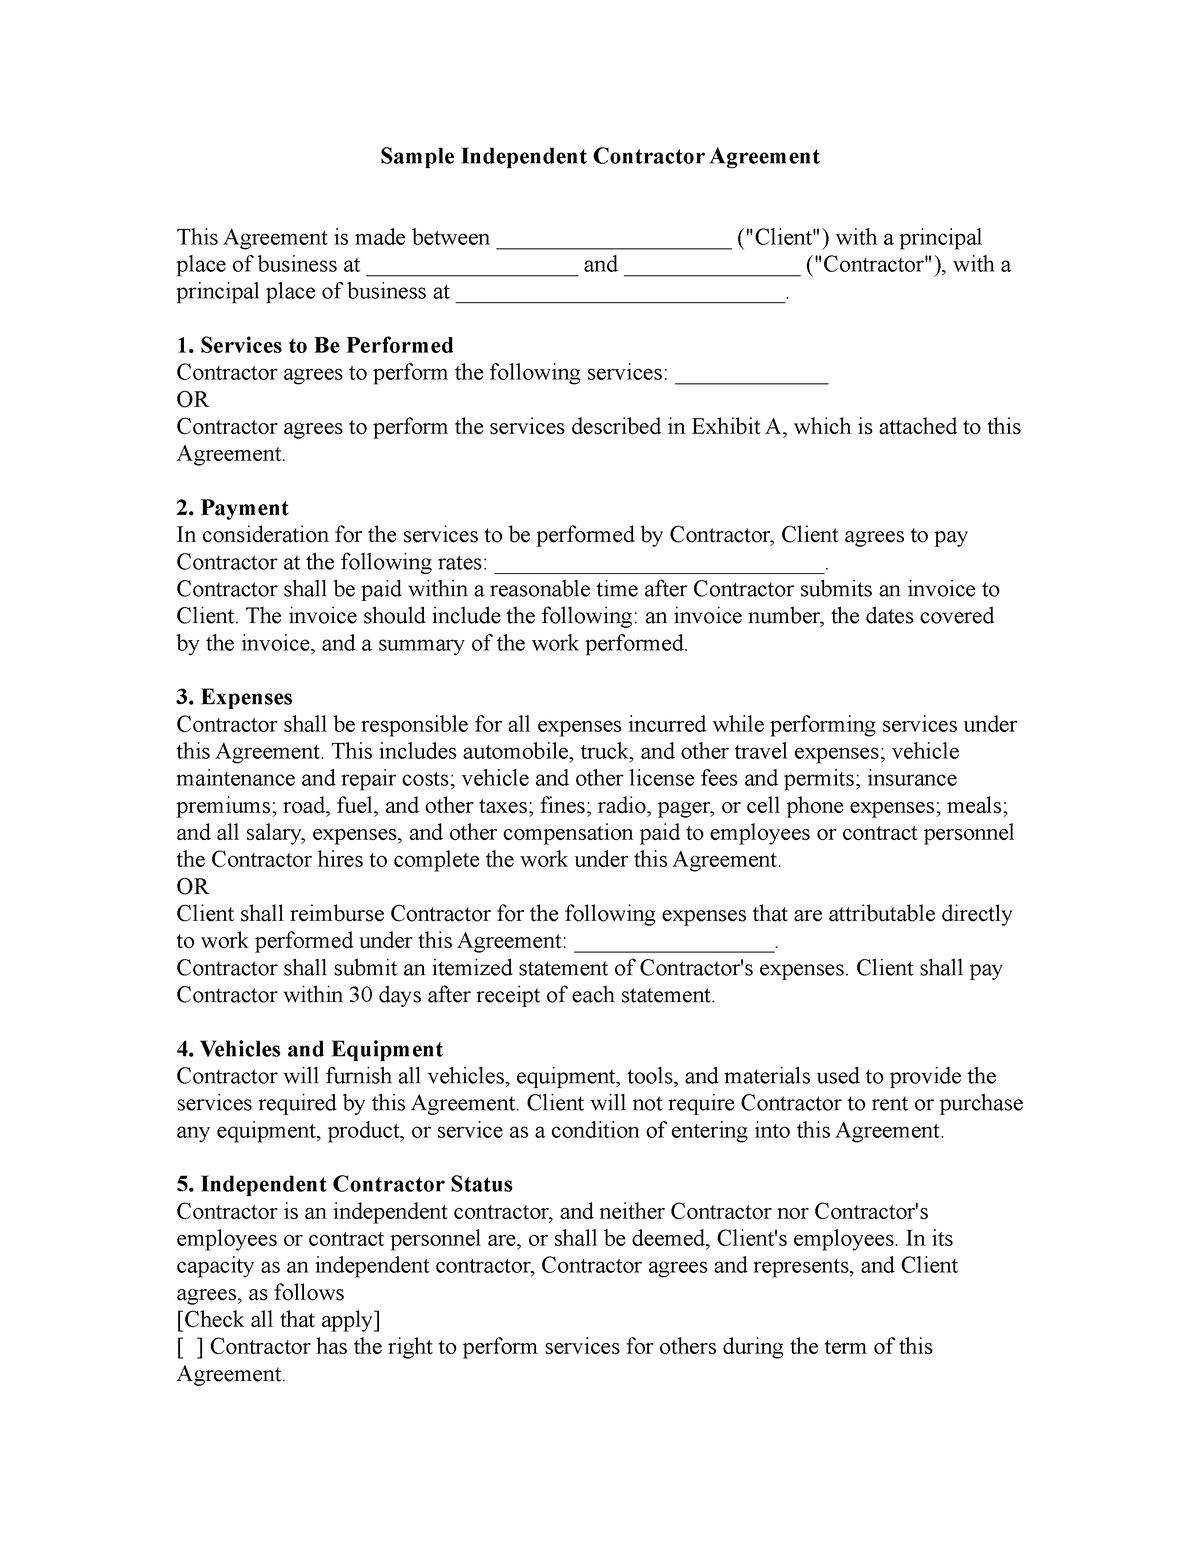 sample-independent-contractor-agreement-final-fall2014-sample